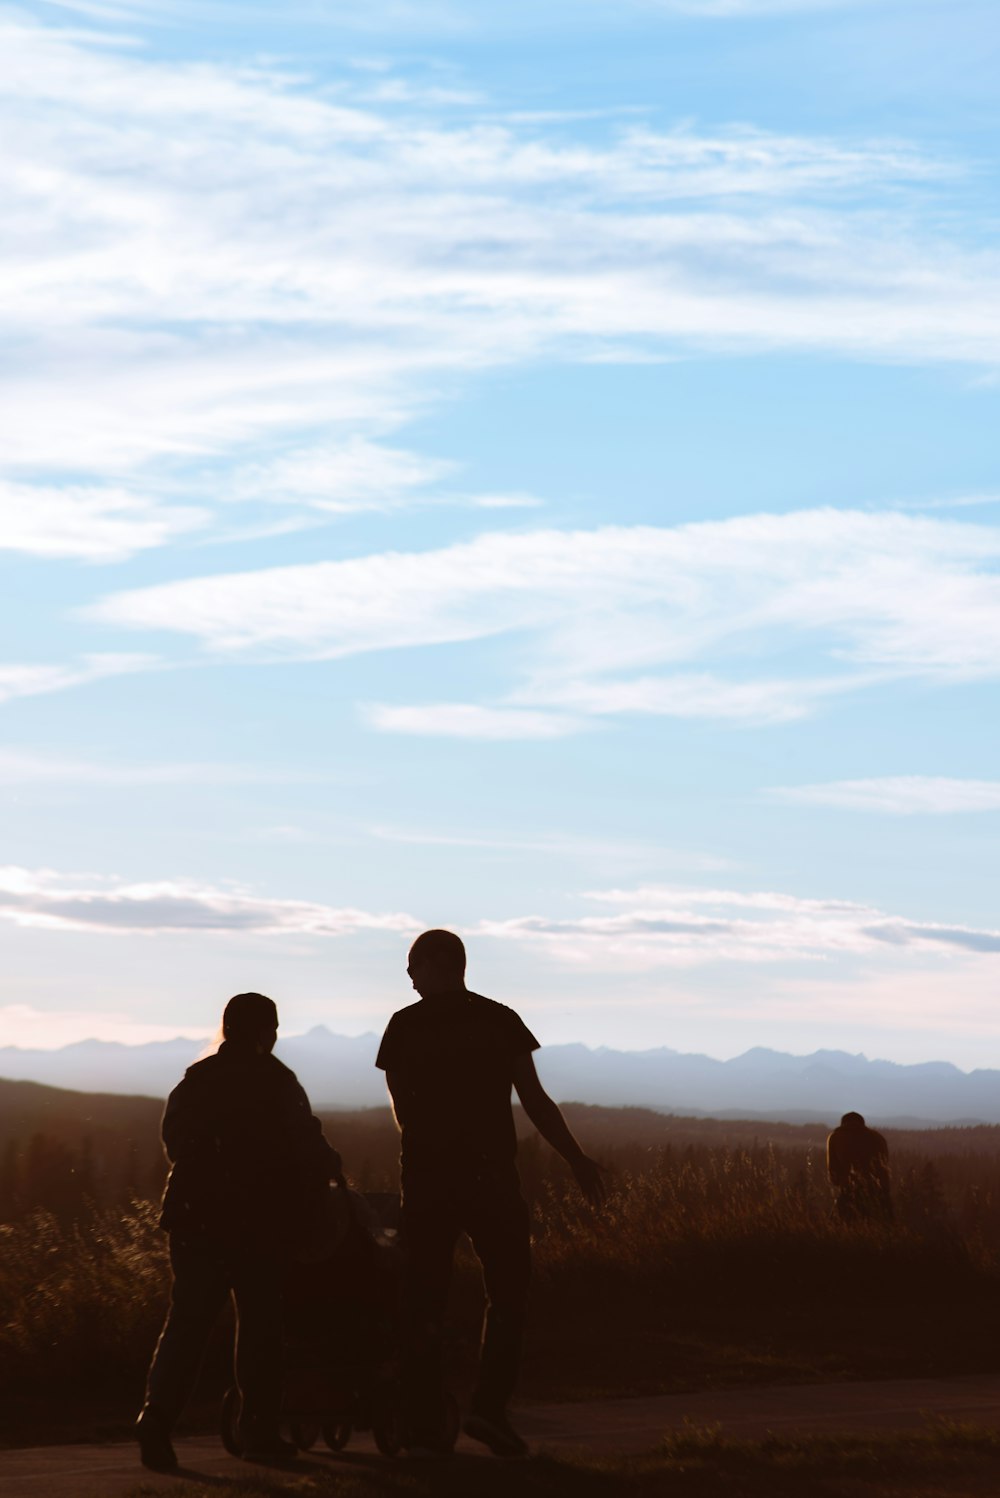 silhouette of 2 person standing on grass field during sunset